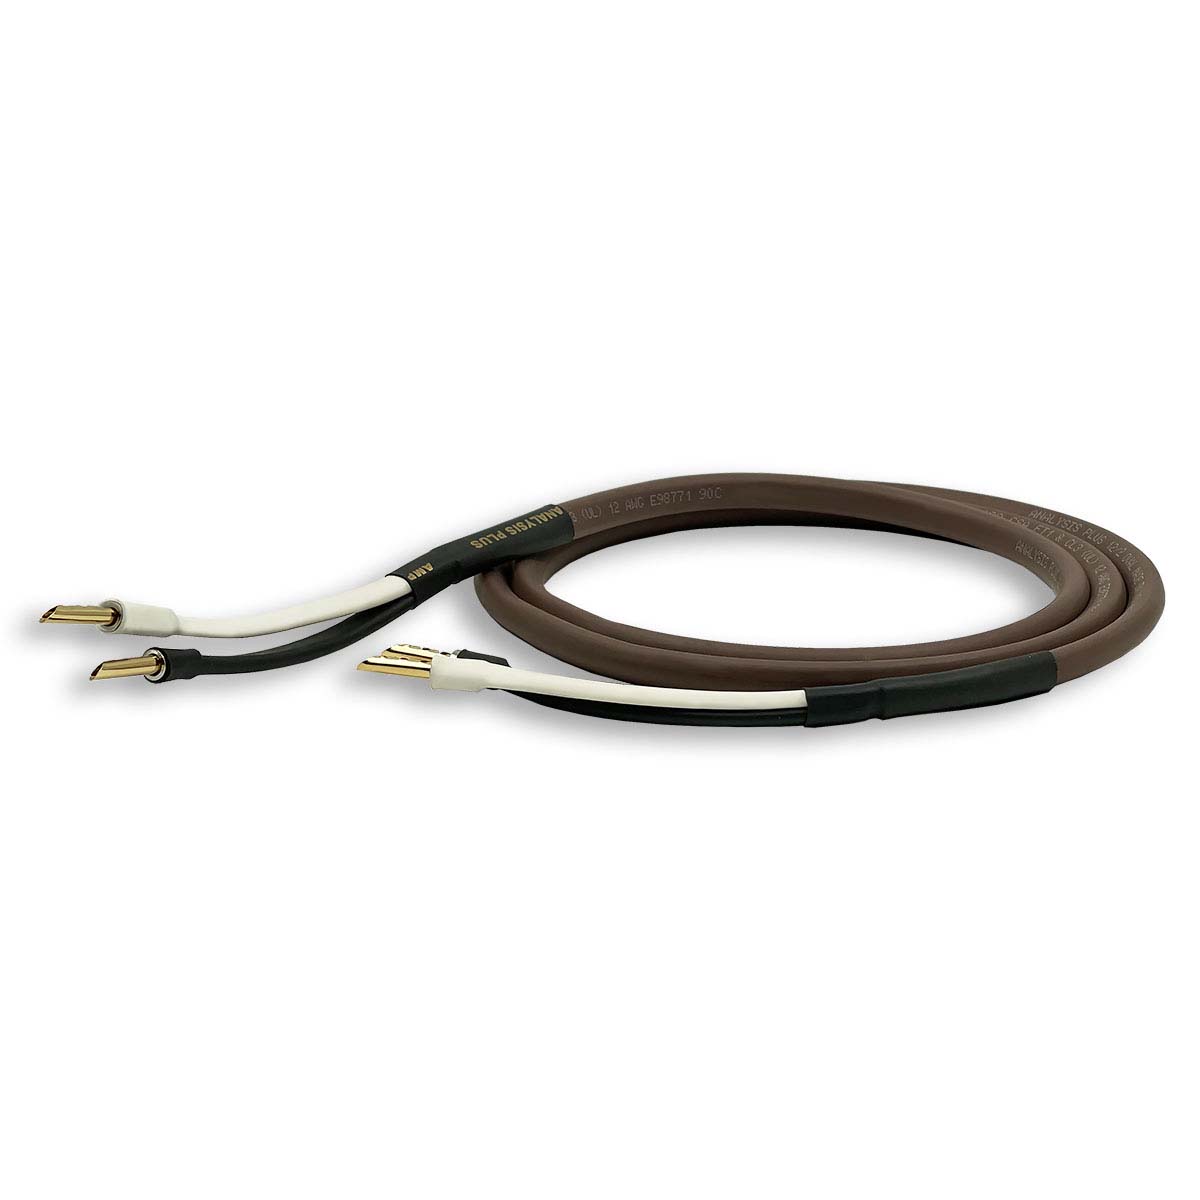 Analysis Plus Chocolate Oval 12/2 CL3 Speaker Cable